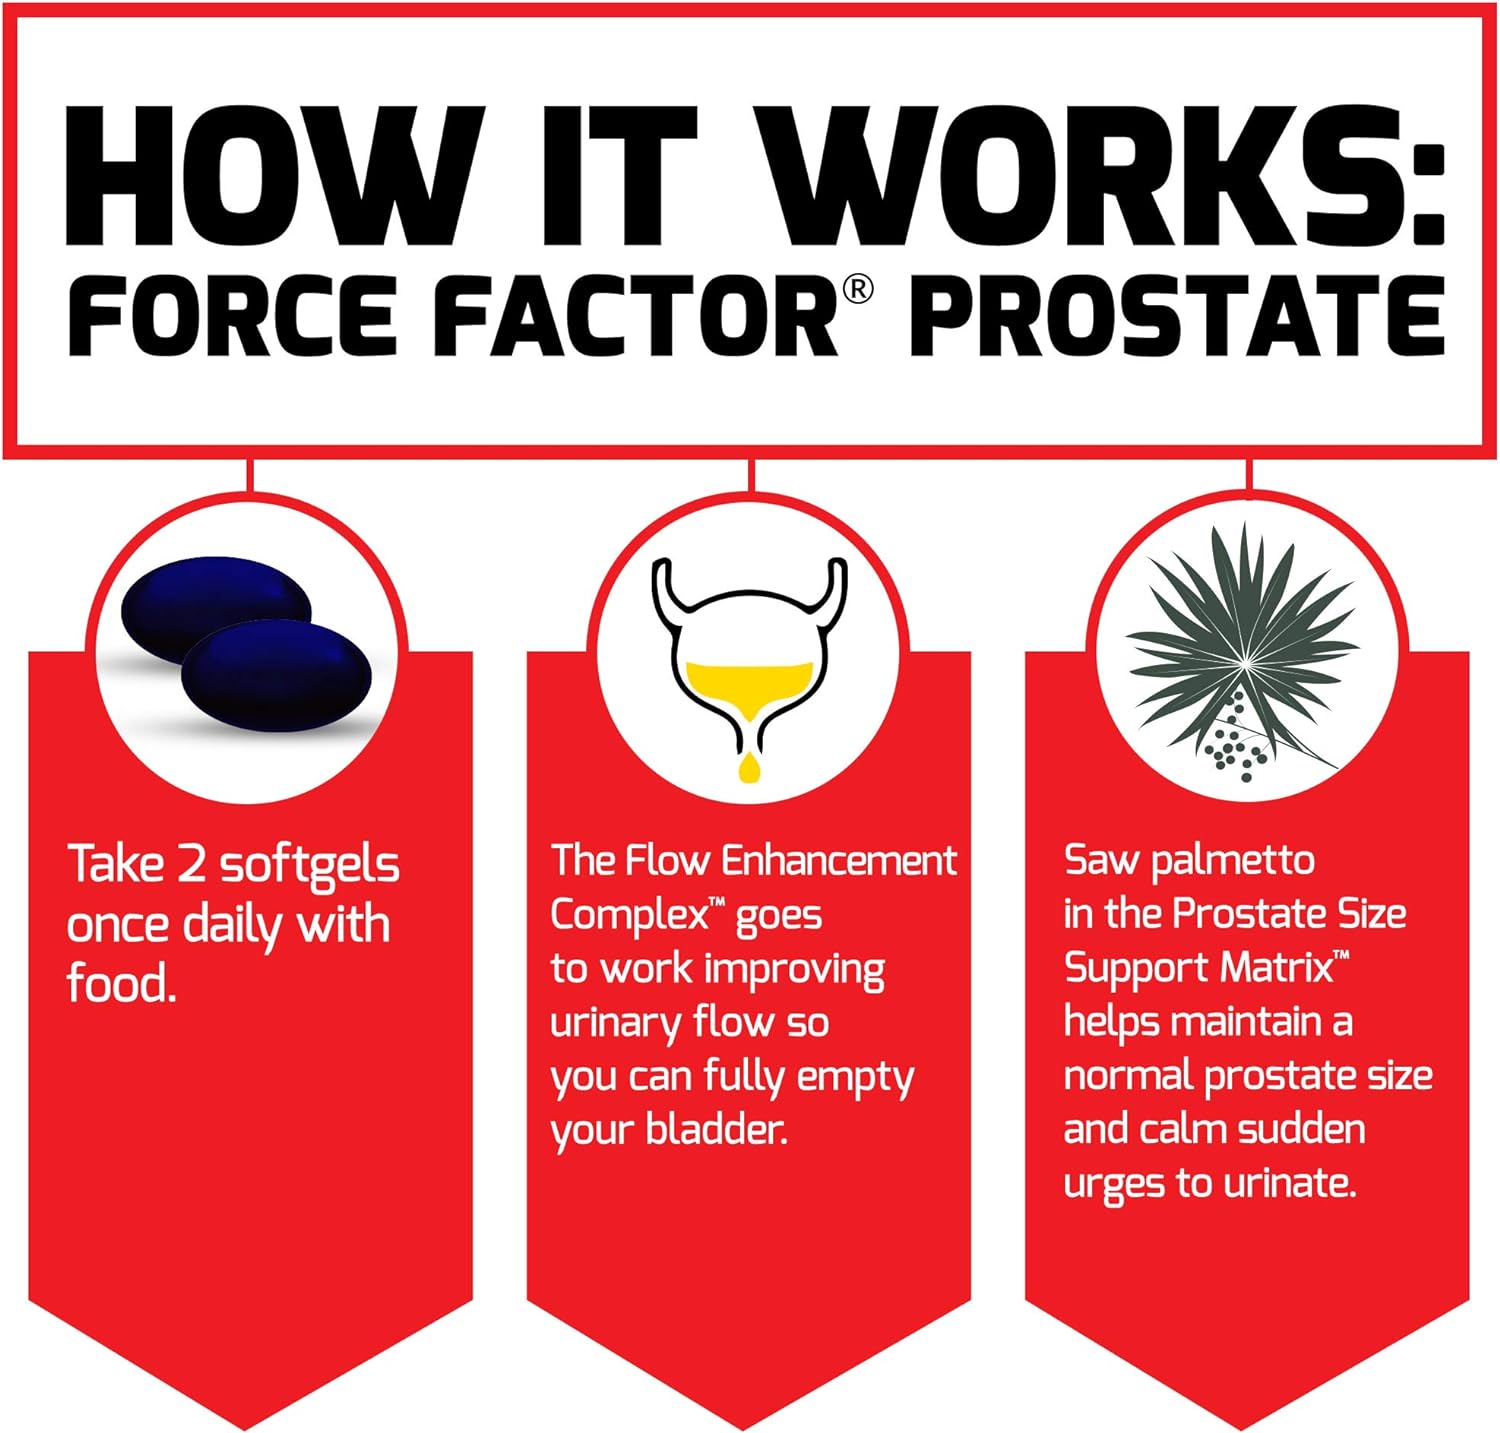 Force Factor Prostate Saw Palmetto and Beta Sitosterol Supplement for Men, Prostate Health/Size Support, Urinary Relief, Bladder Control, Reduce Nighttime Urination, 60 Softgels : Health & Household